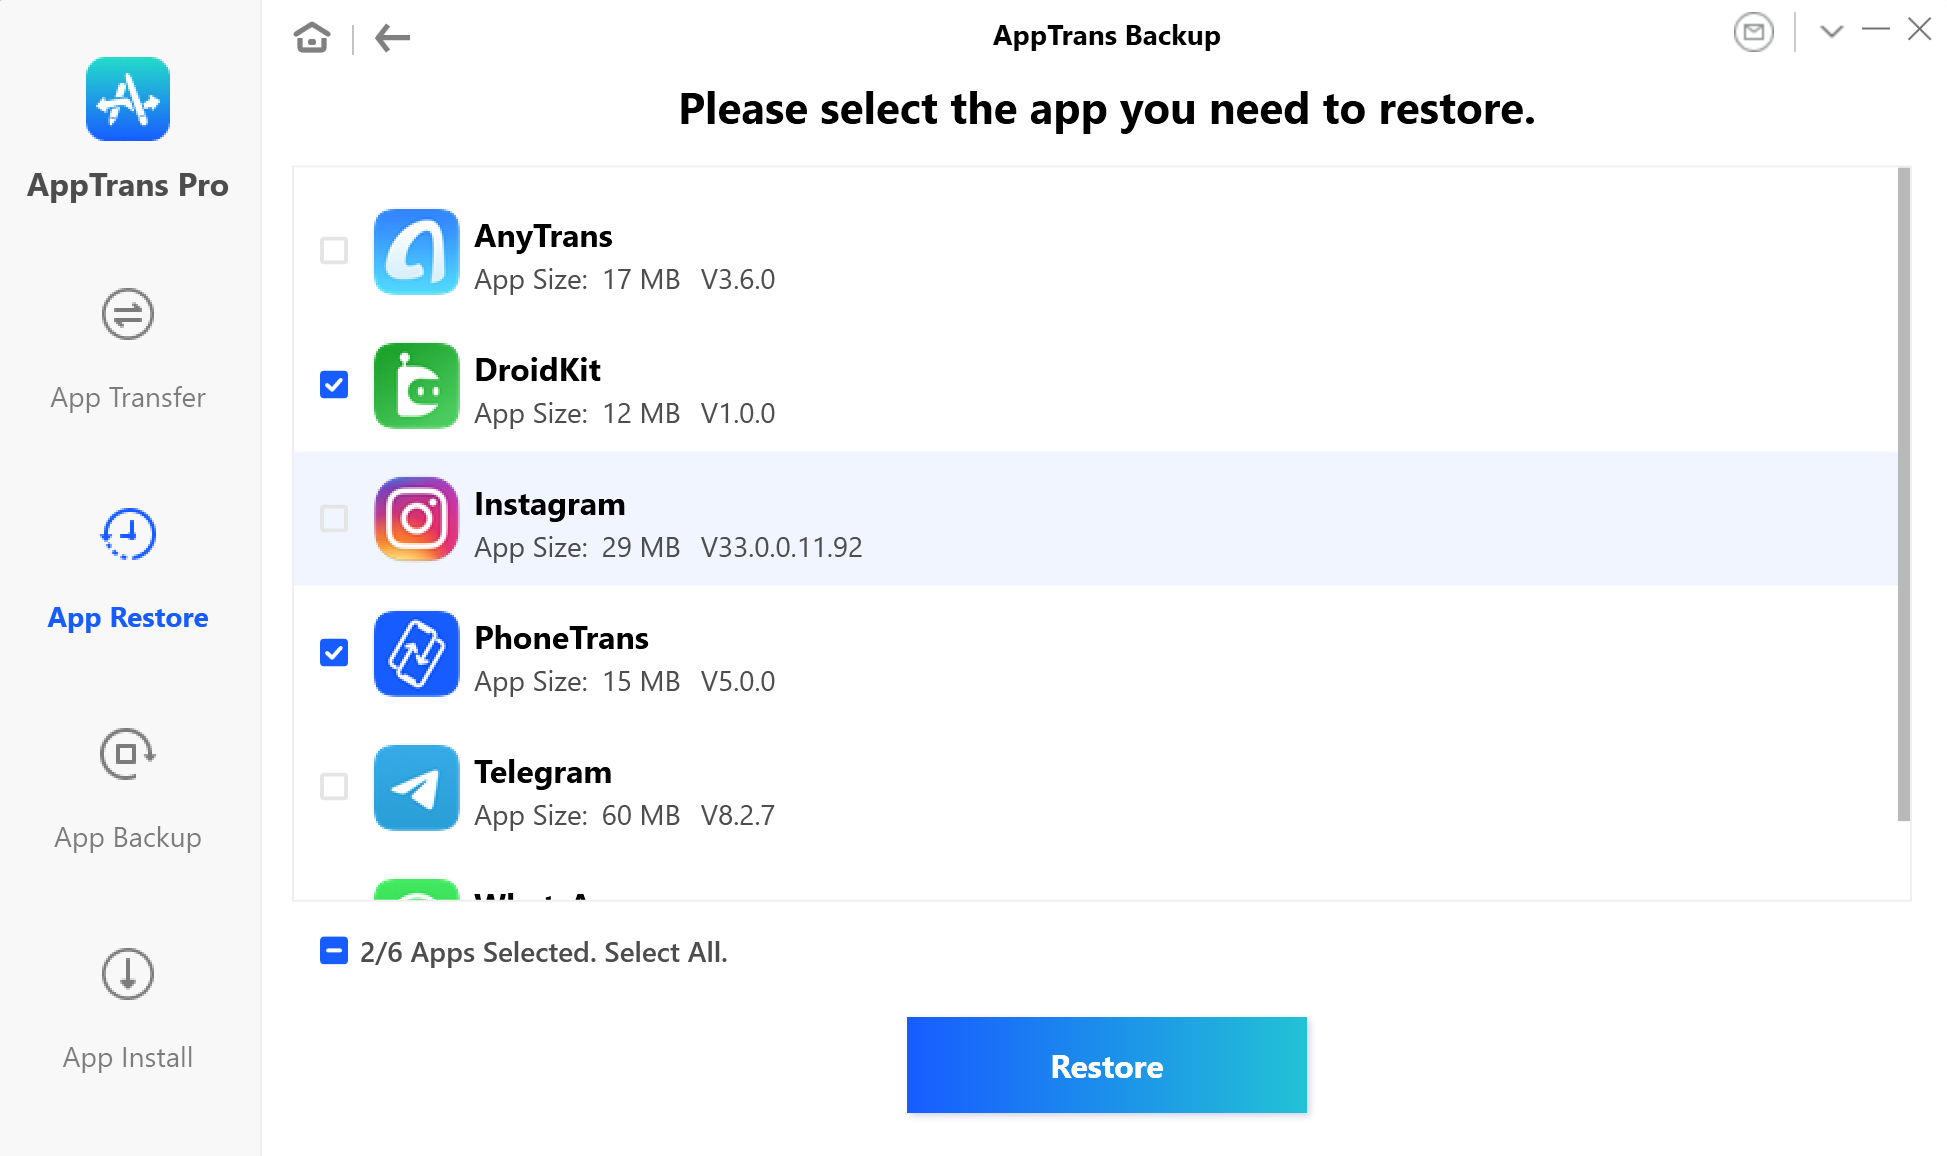 Select the App And App Data to Restore